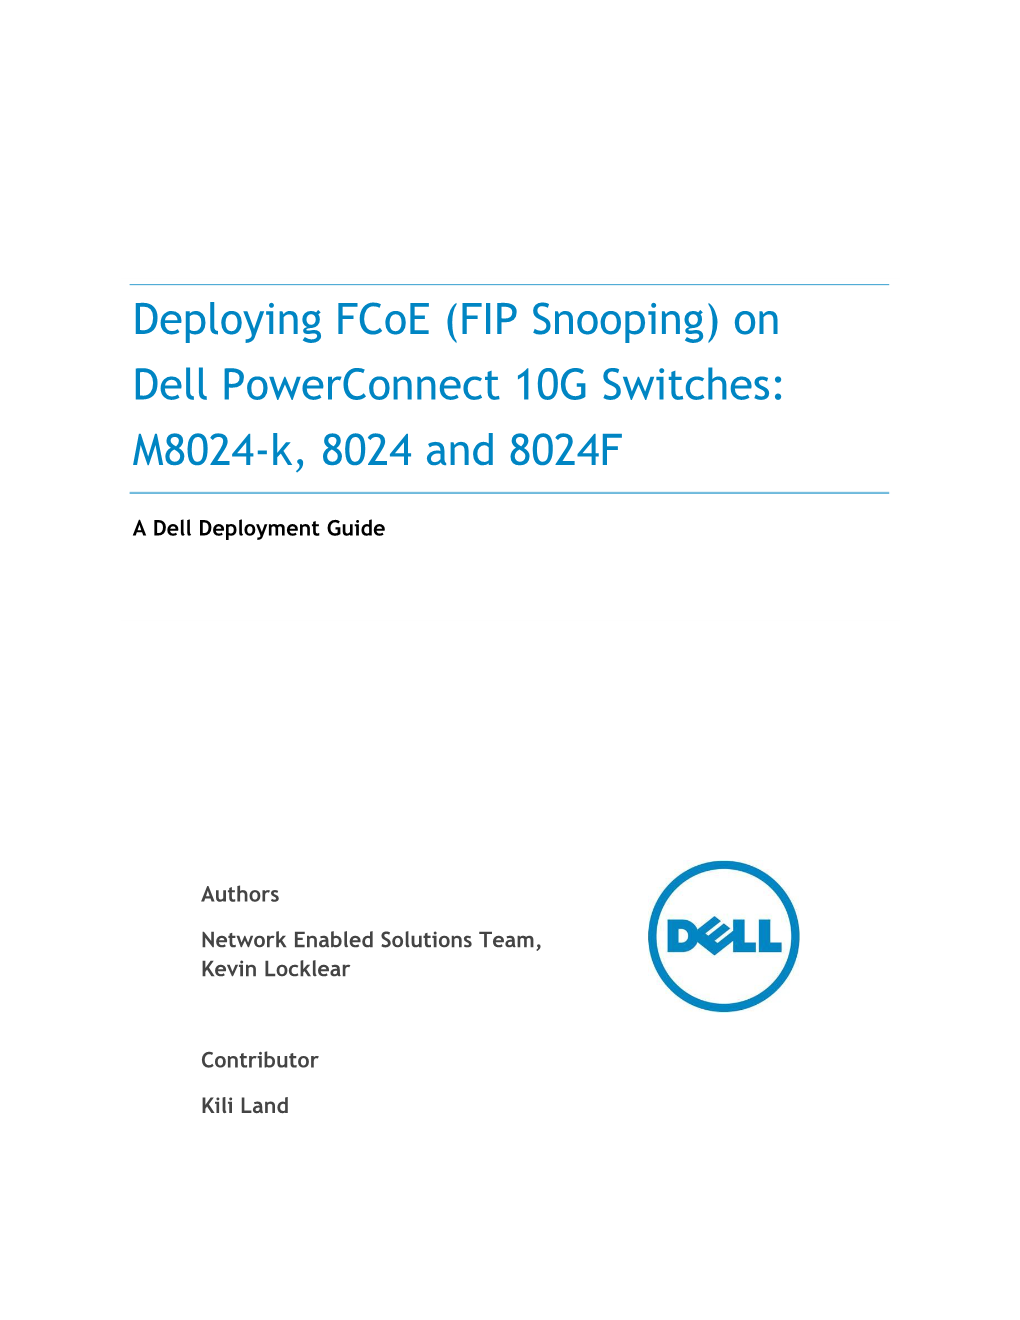 Deploying Fcoe on Dell Powerconnect 8024 Series Switches